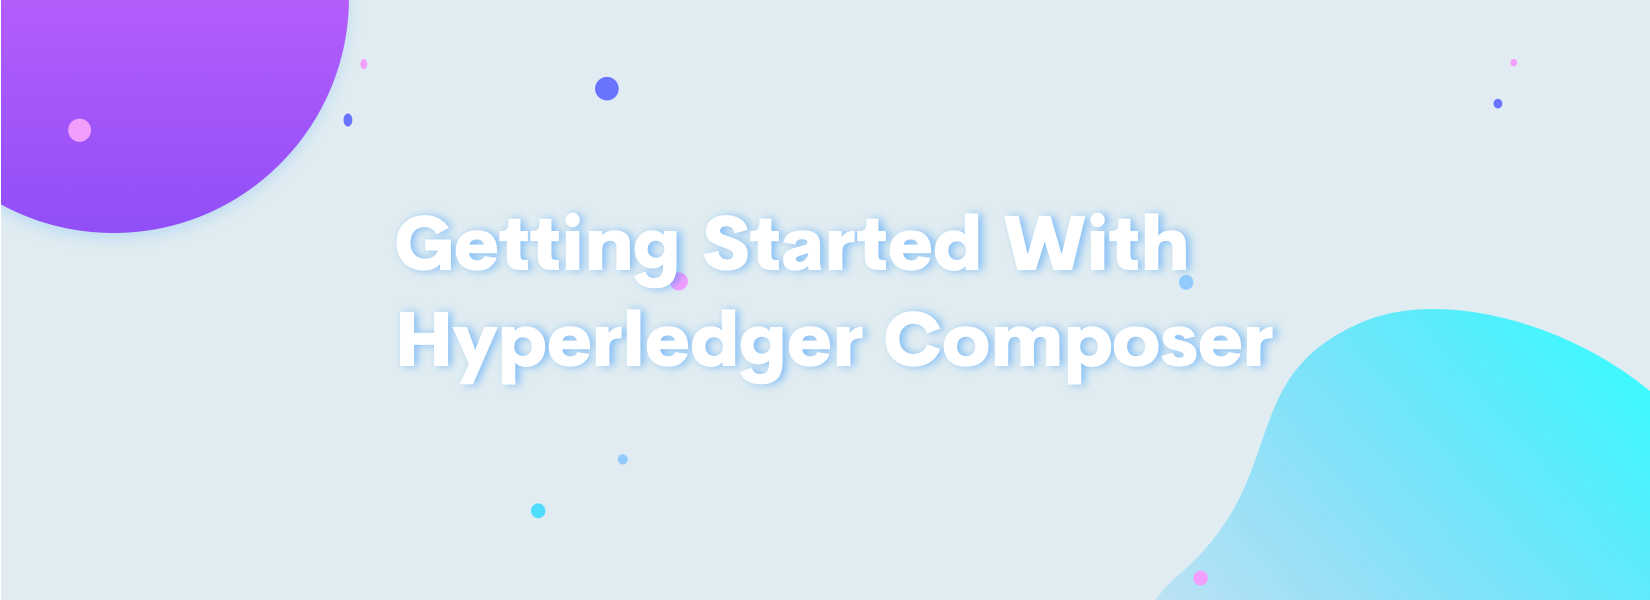 Getting Started With Hyperledger Composer